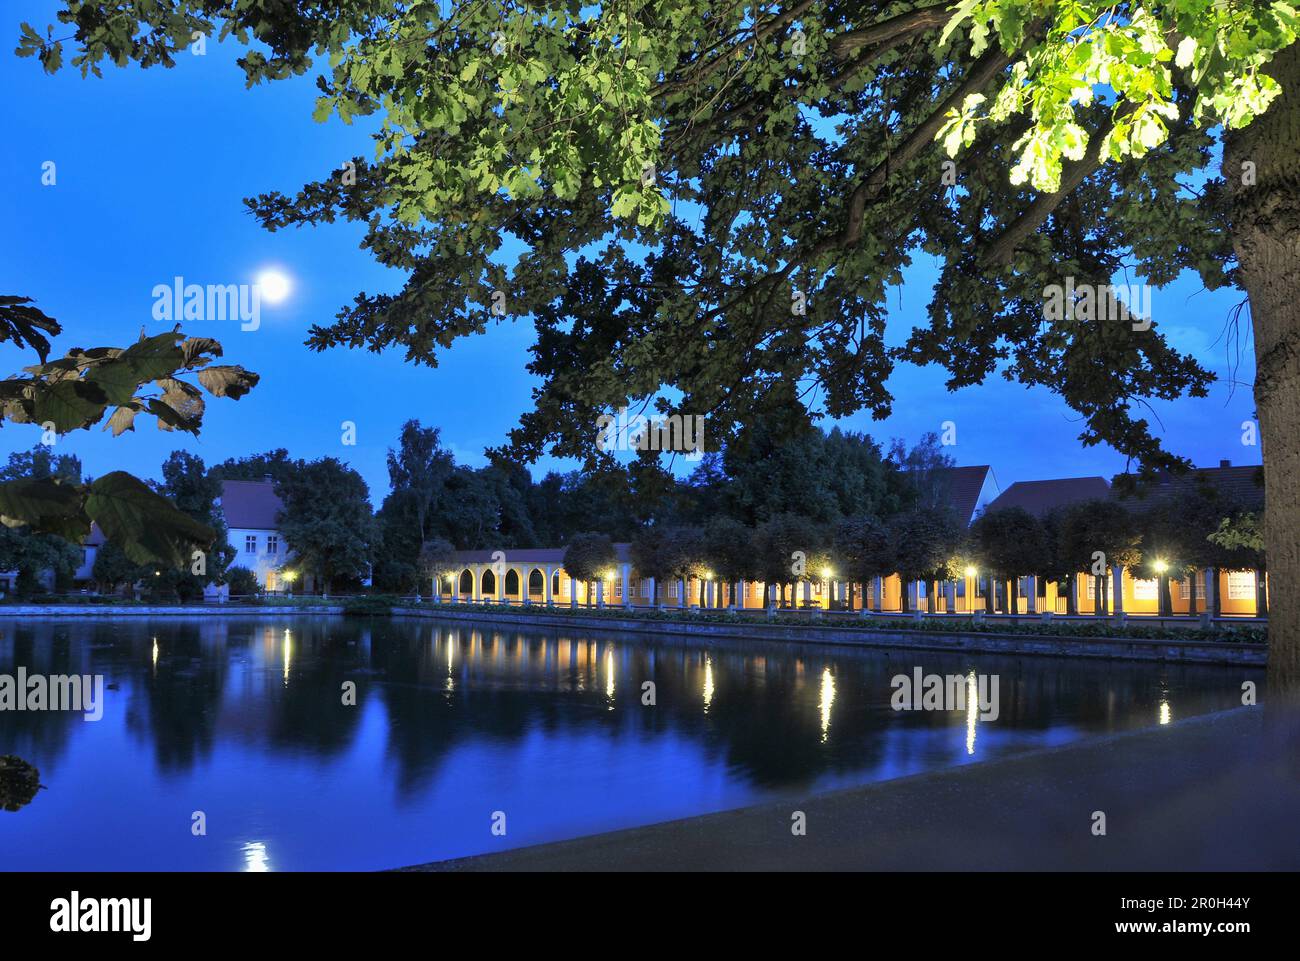 Lake at the Kurpark at night, Bad Lauchstaedt, Saxony-Anhalt, Germany, Europe Stock Photo